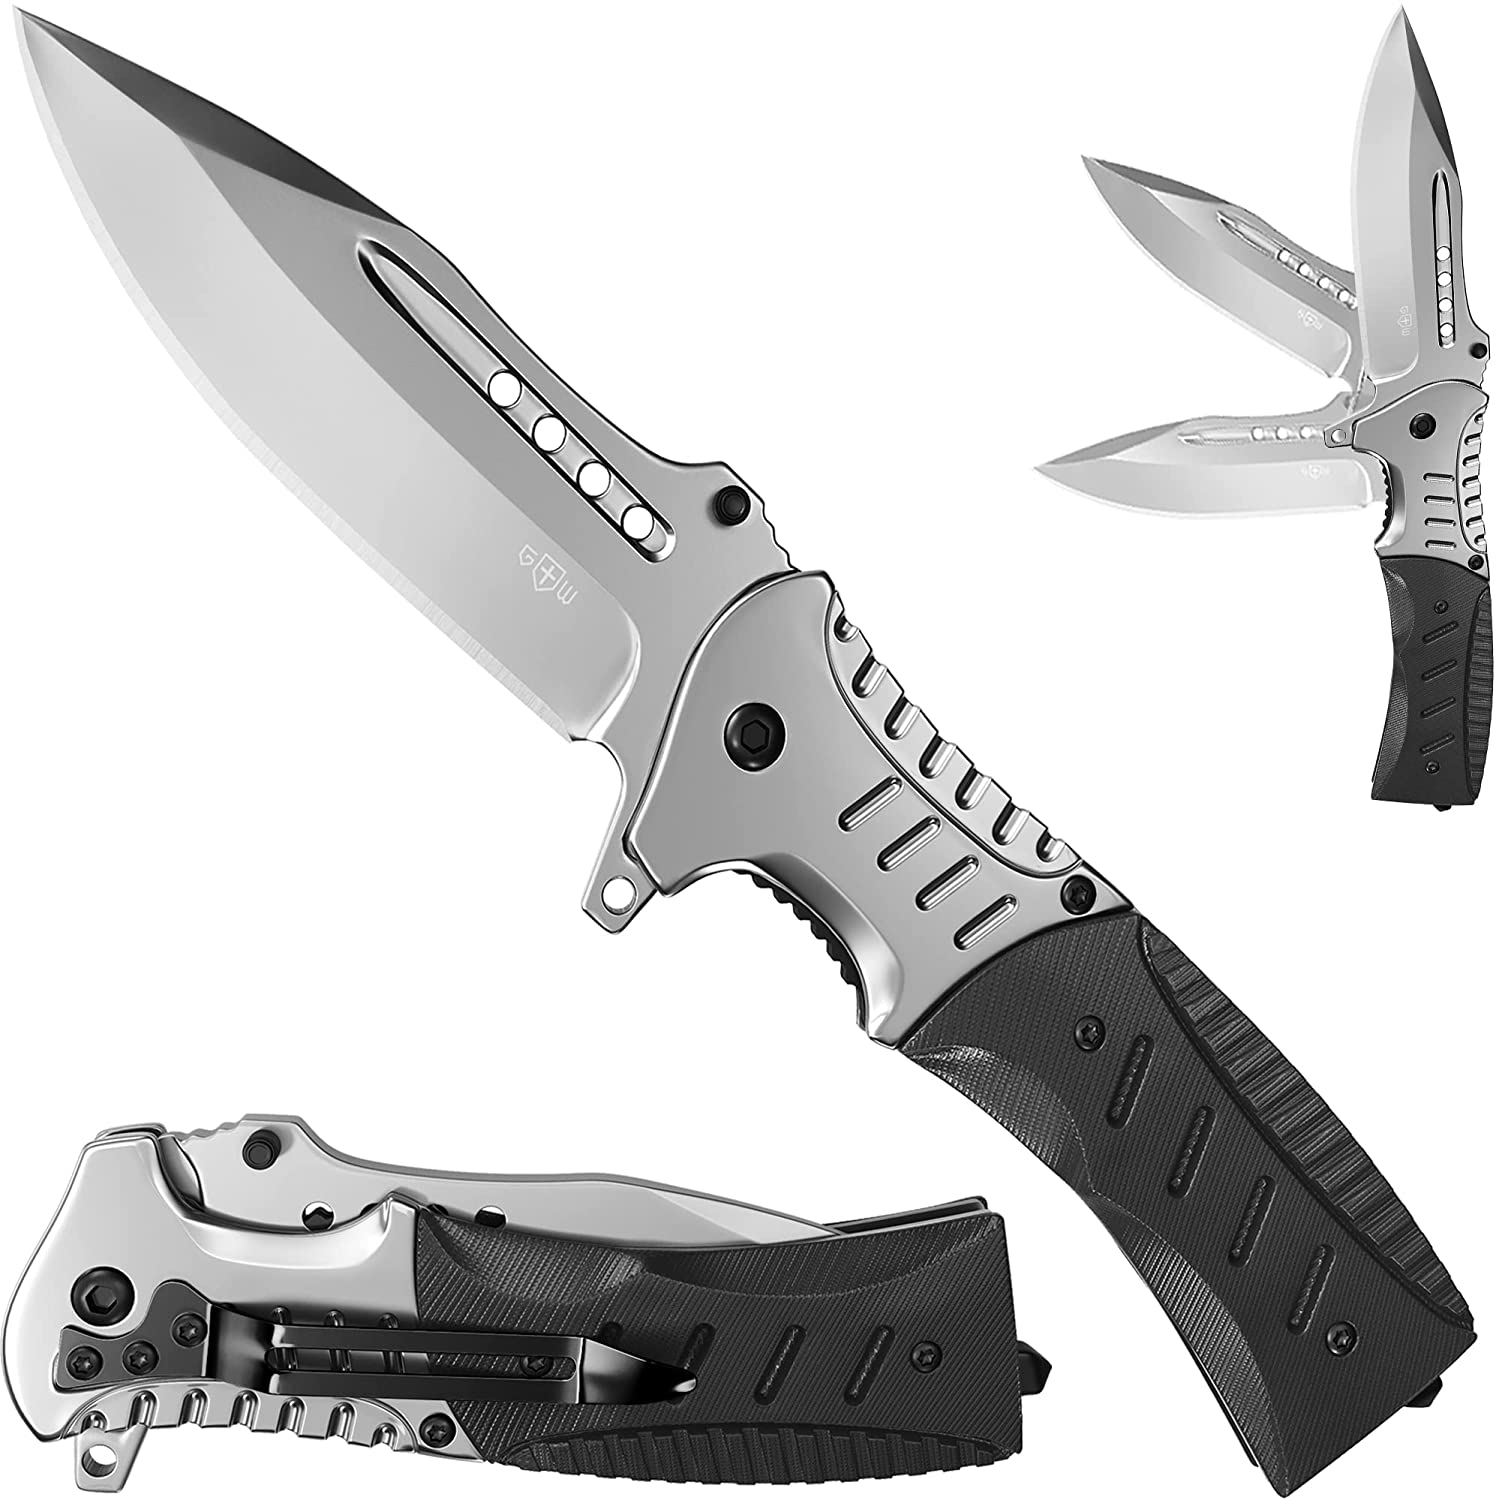 Pocket Knife Spring Assisted Folding Knives - Military EDC USMC Tactical Jack Knifes - Best Camping Hunting Fishing Hiking Survival Knofe - Travel Accessories Gear Boy Scout Knife Gifts for Men